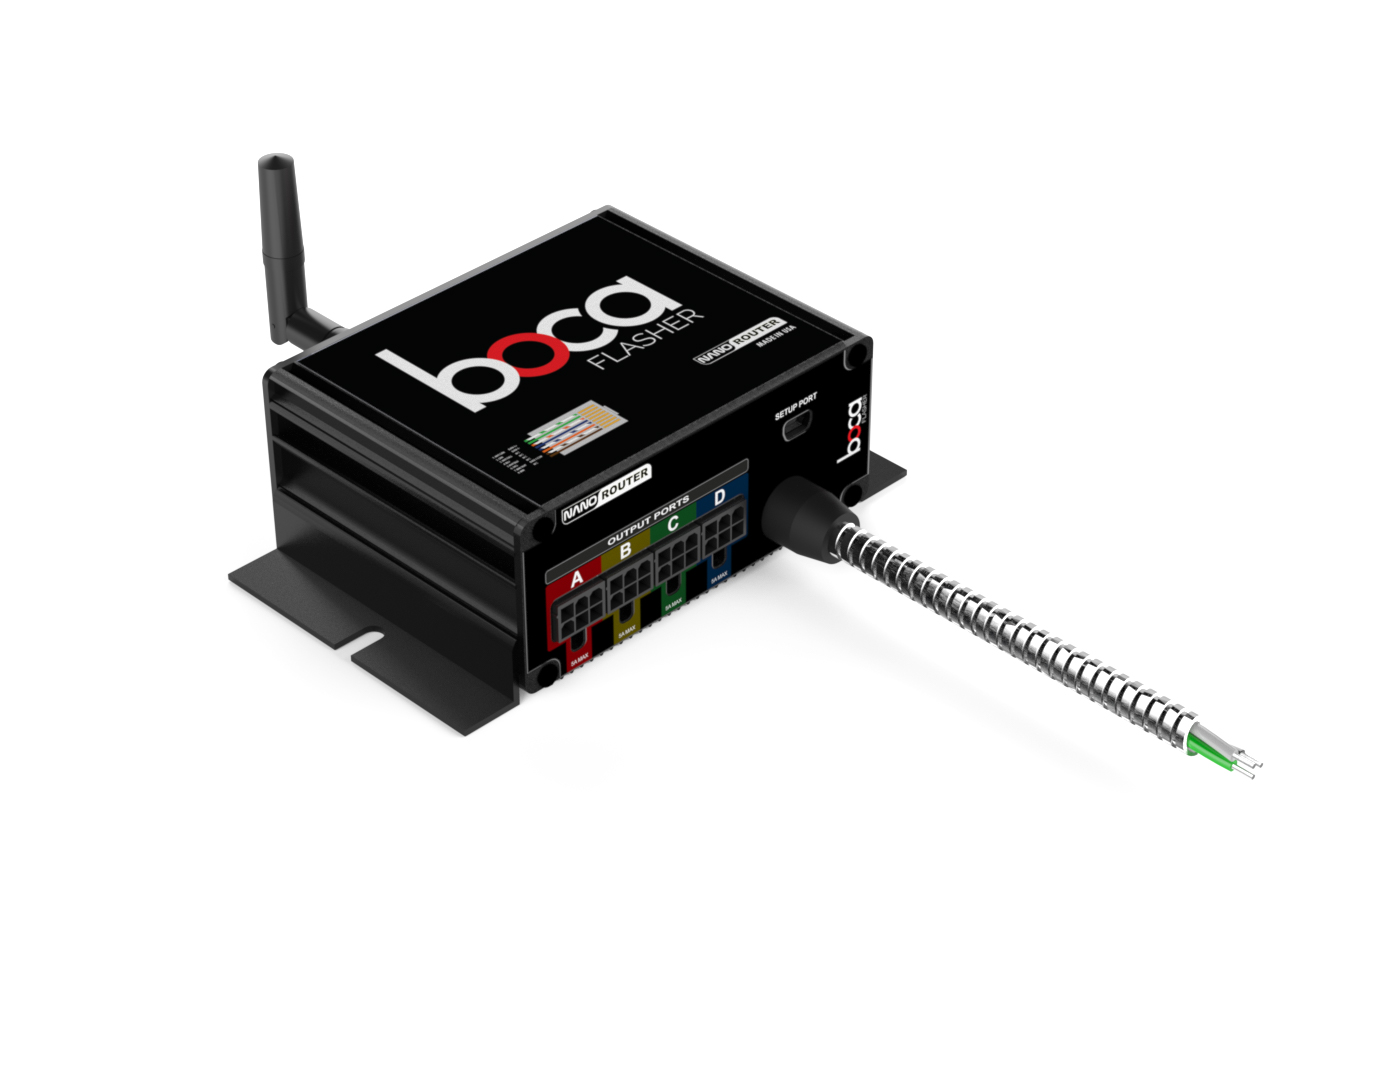 The Boca Lighting and Controls NanoRouter allows for wireless communication from any DMX show controller to the full range of Boca Flasher color changing lines. It can be configured to serve as transmitters, receivers, or both.